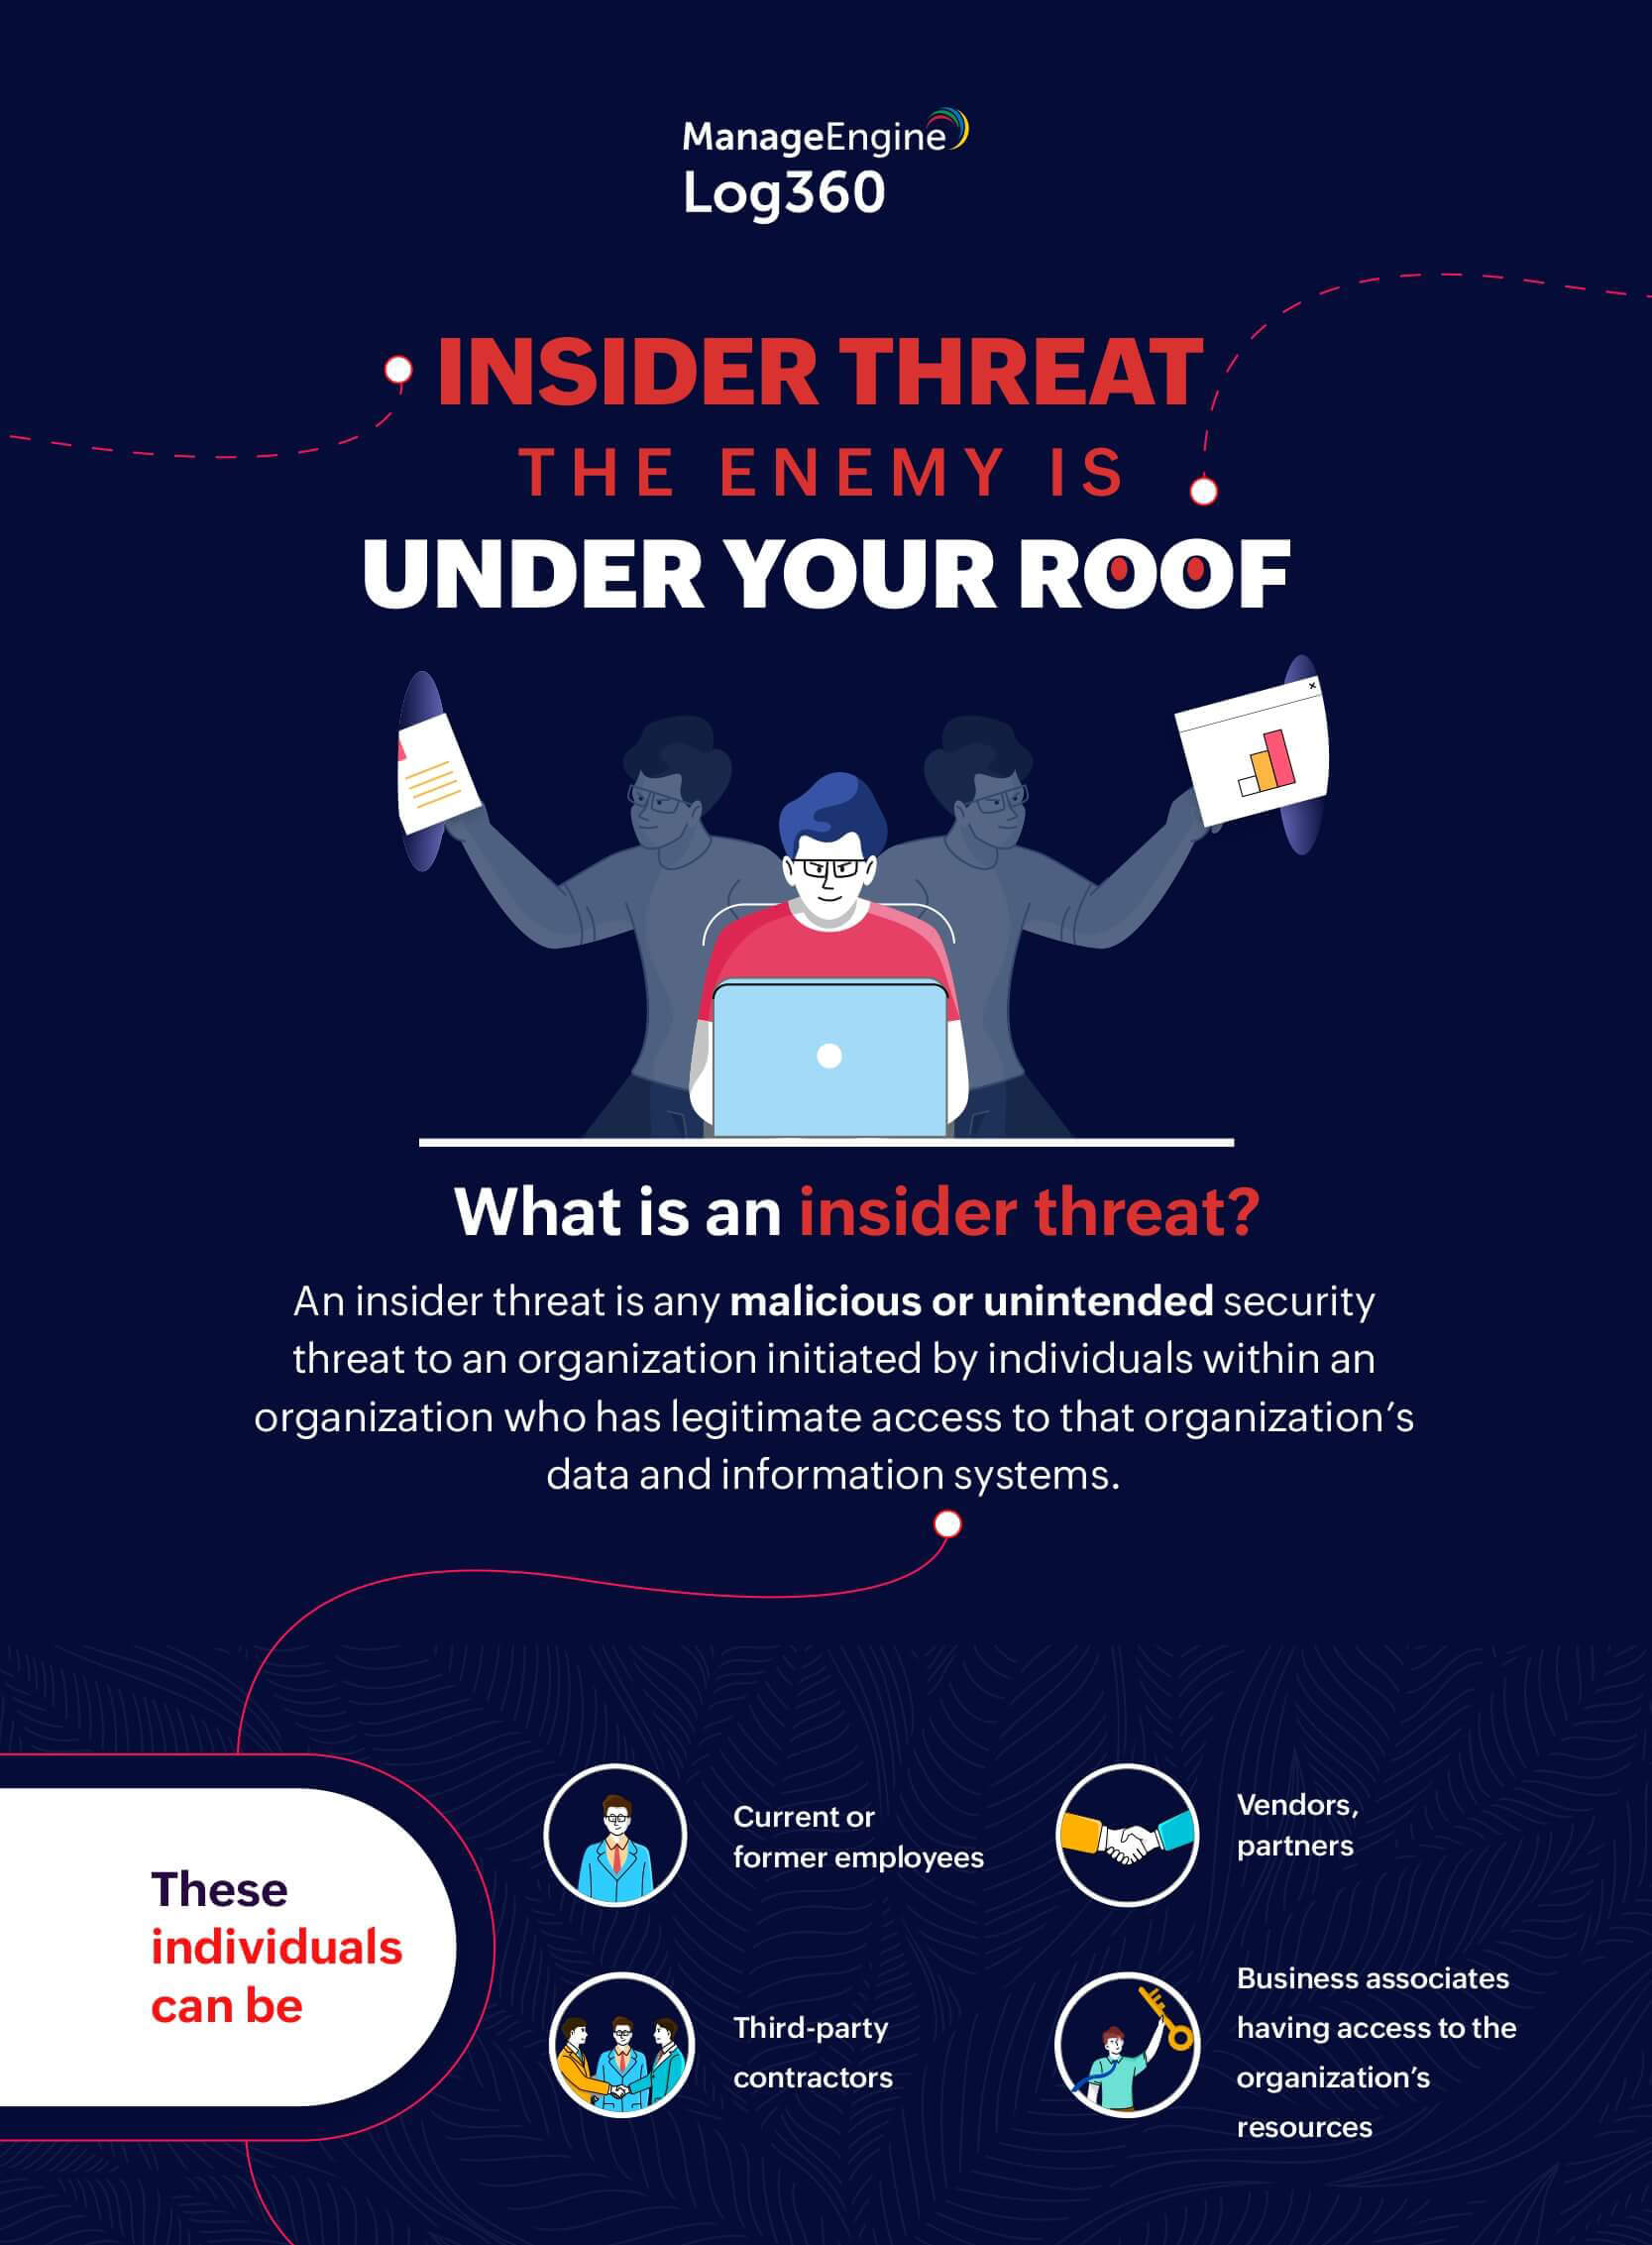 Insider threat: The enemy is under your roof